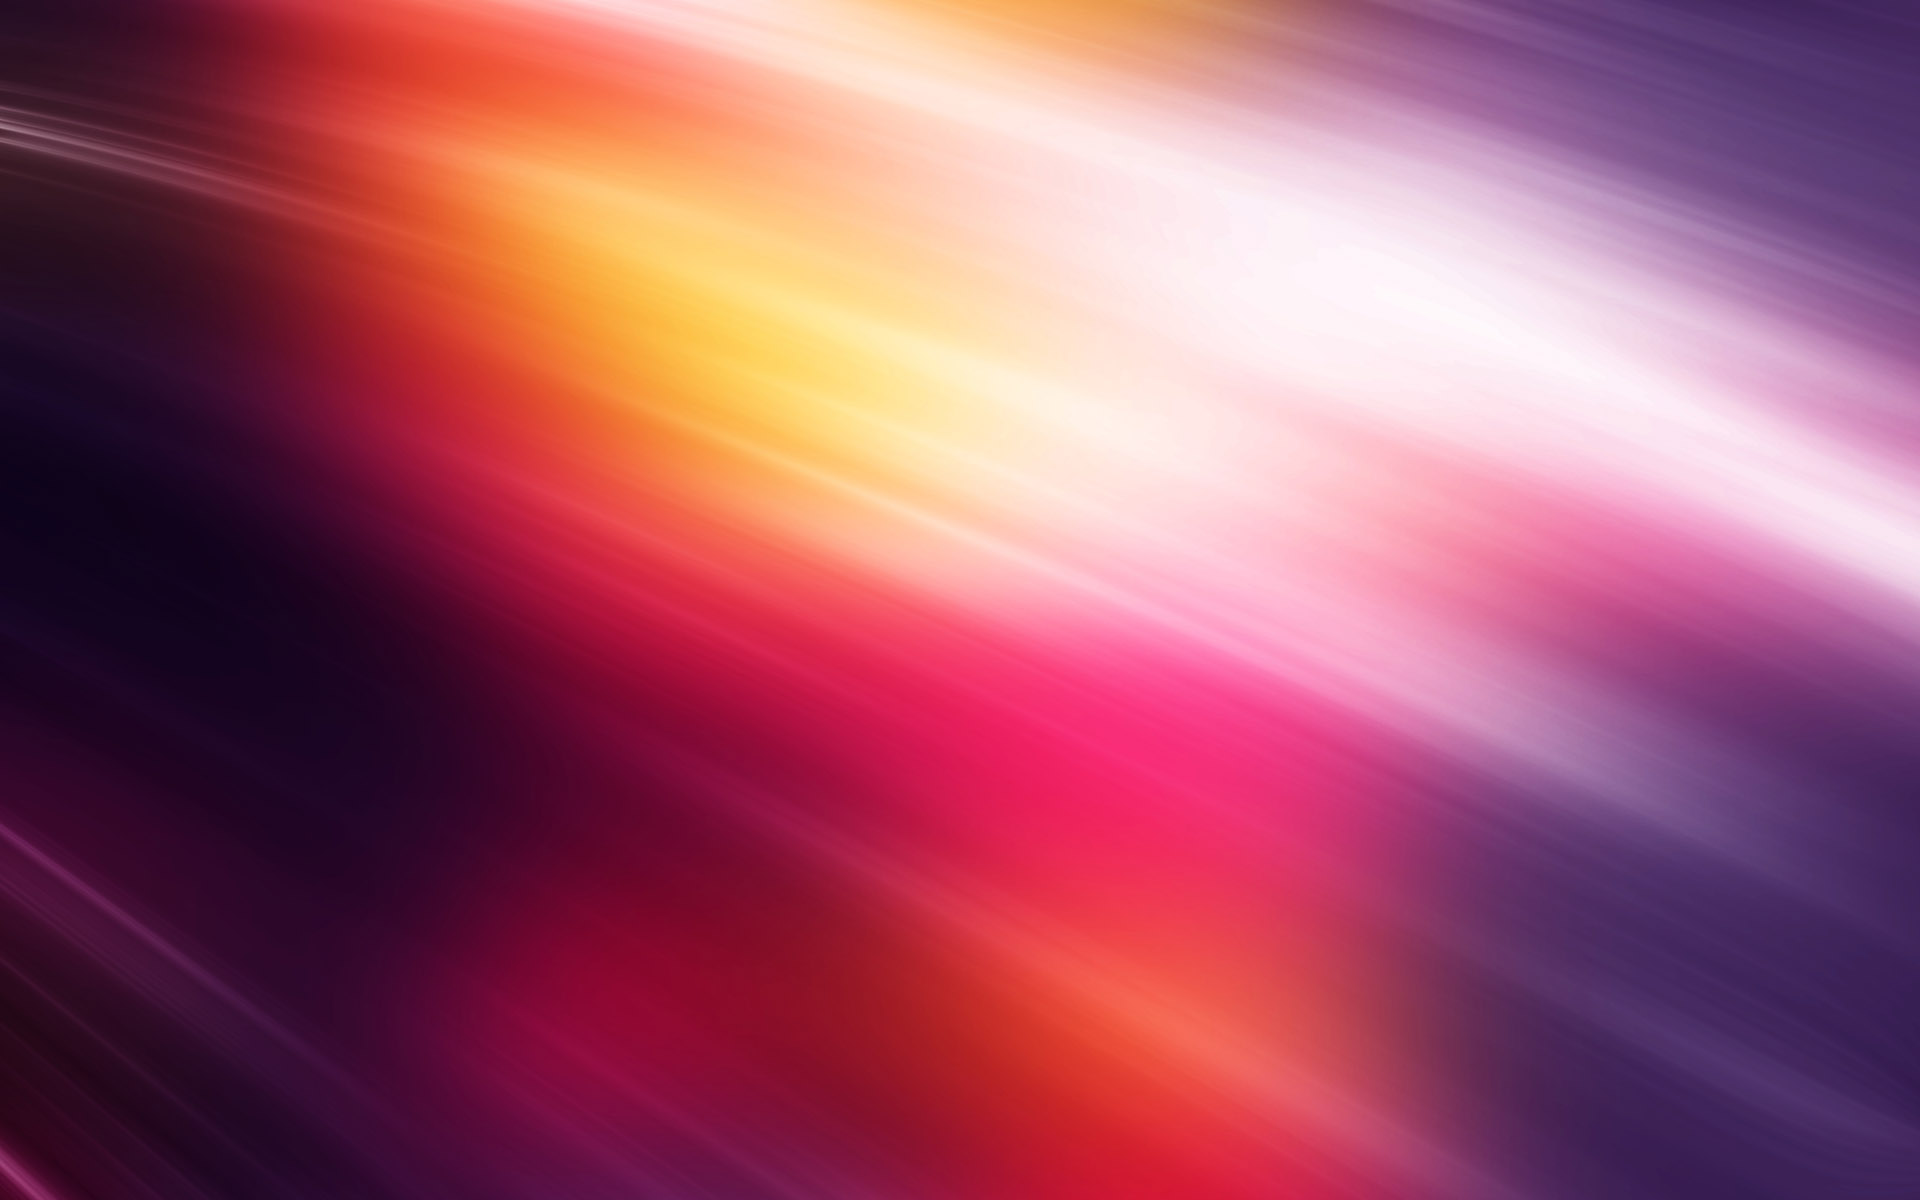 Colorful Backgrounds free download | Wallpapers, Backgrounds ...